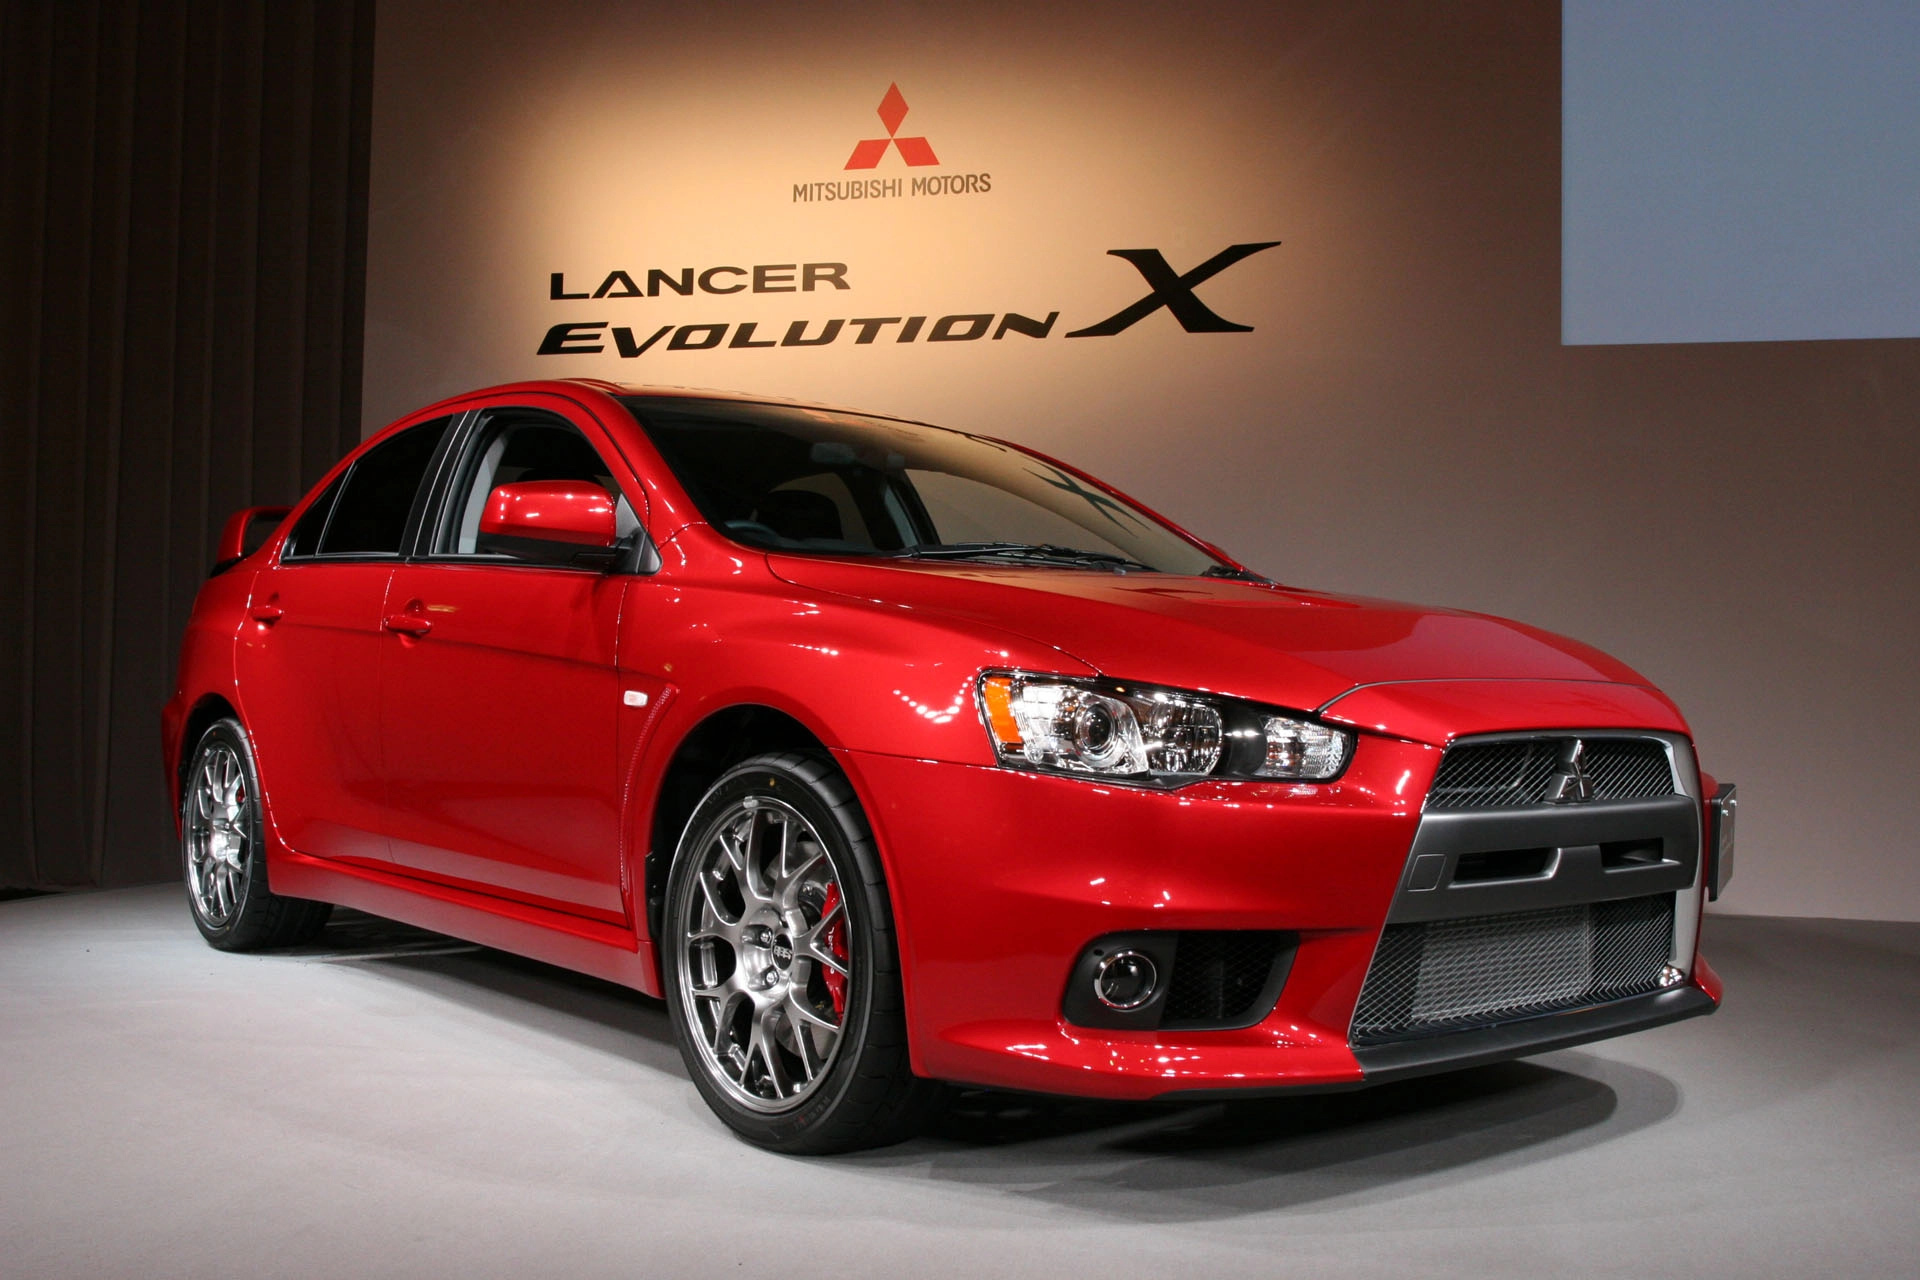 Performance and Technical Specifications of the Mitsubishi Lancer Evo